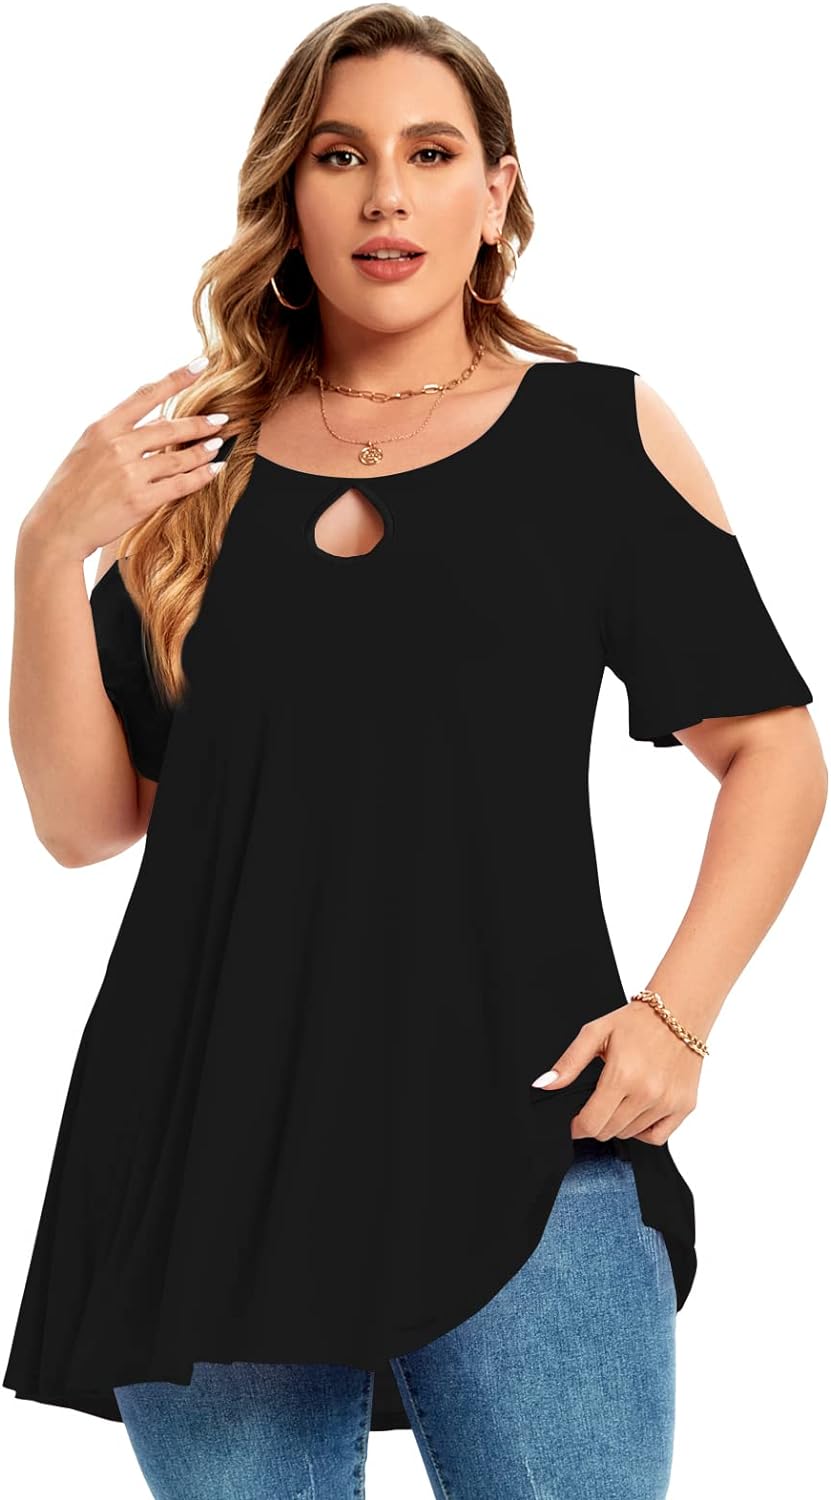 MONNURO Plus Size Cold Shoulder Tops For Women: A Stylish and Comfortable Choice